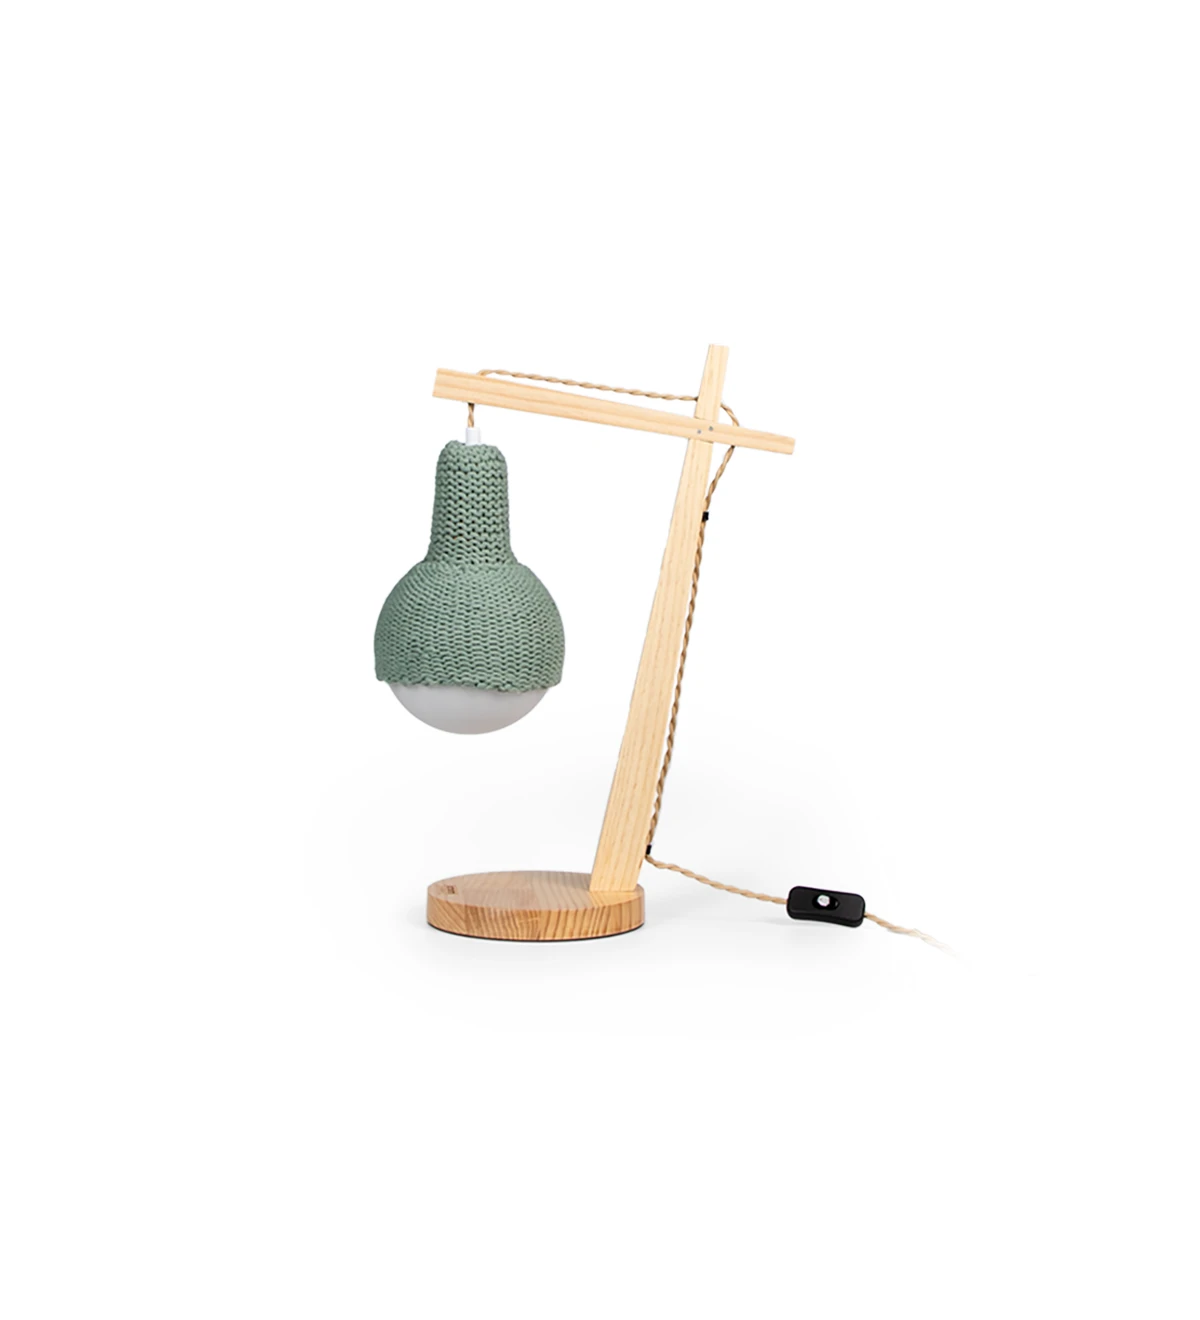  Table lamp with wooden structure and green crochet lamp.